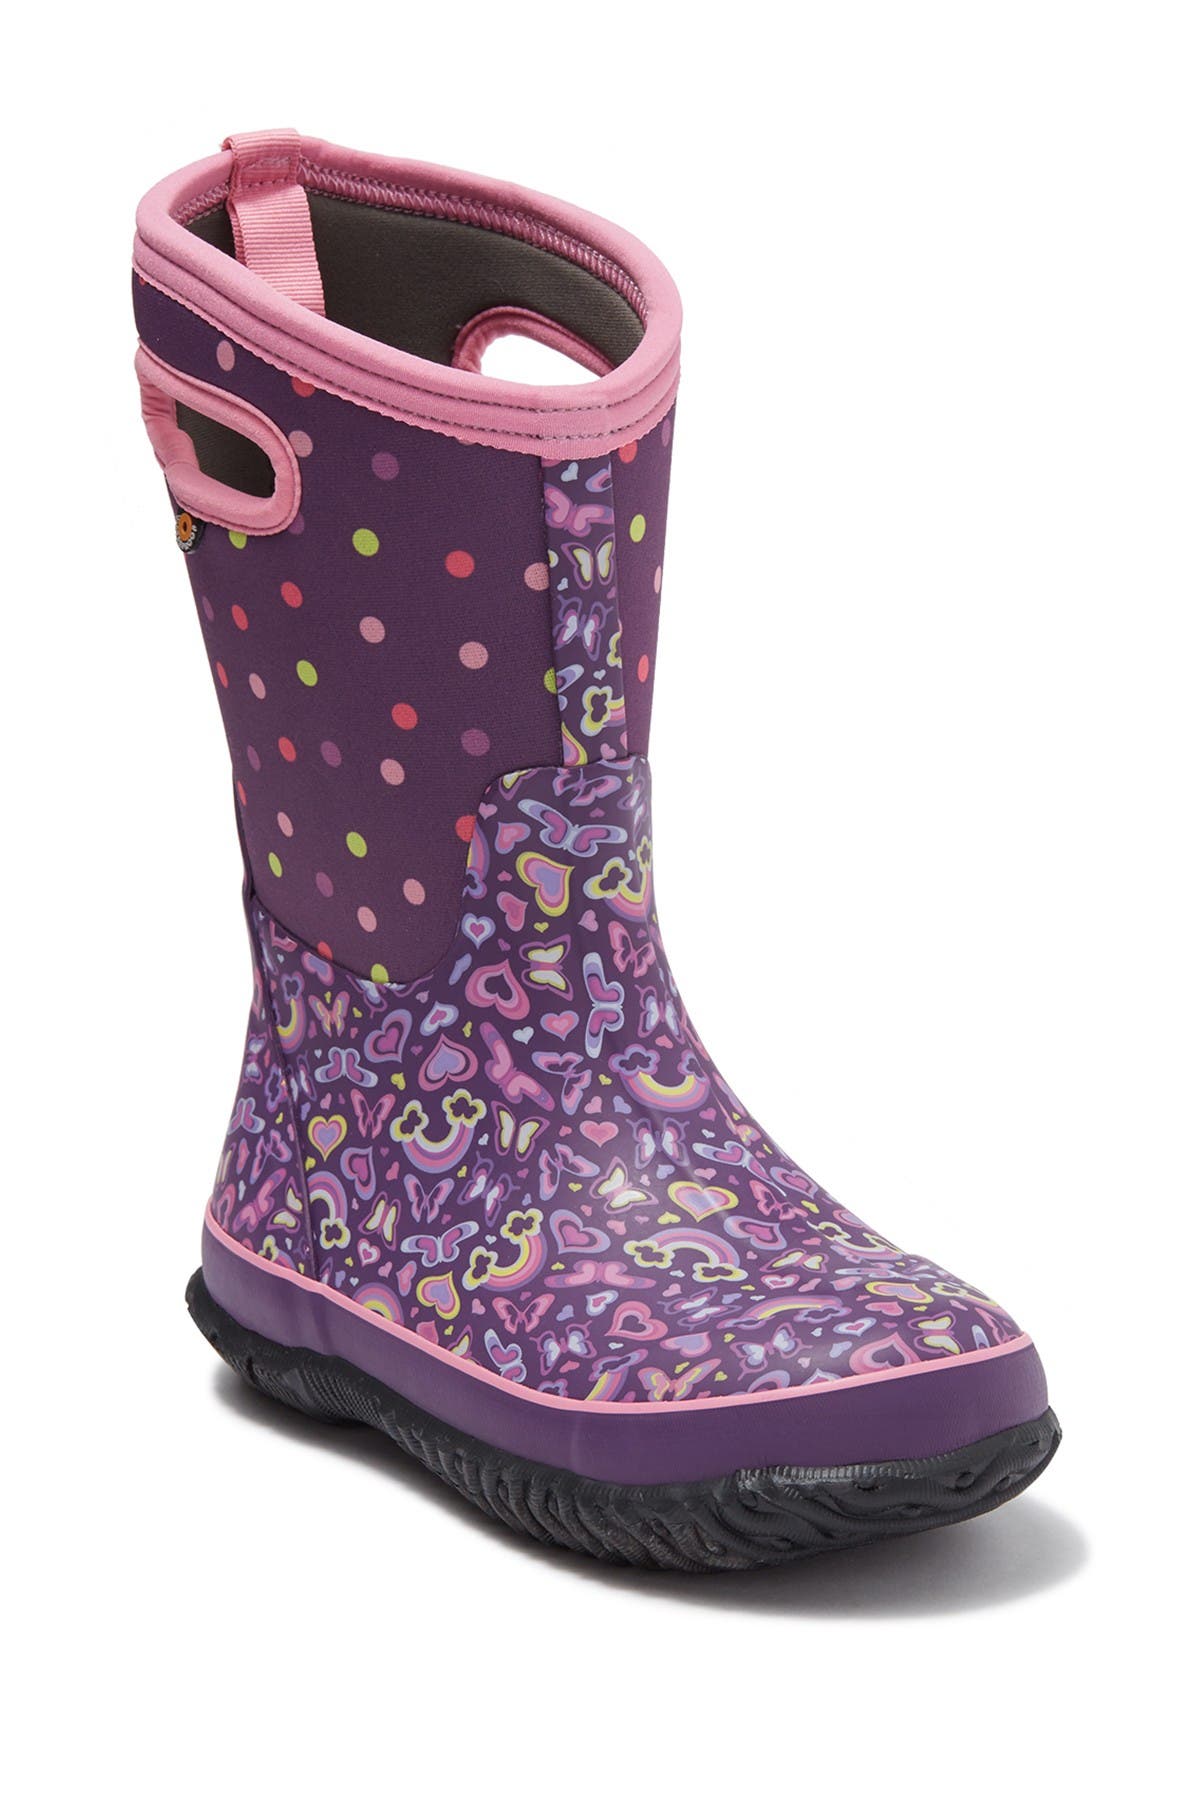 bog boots for toddlers